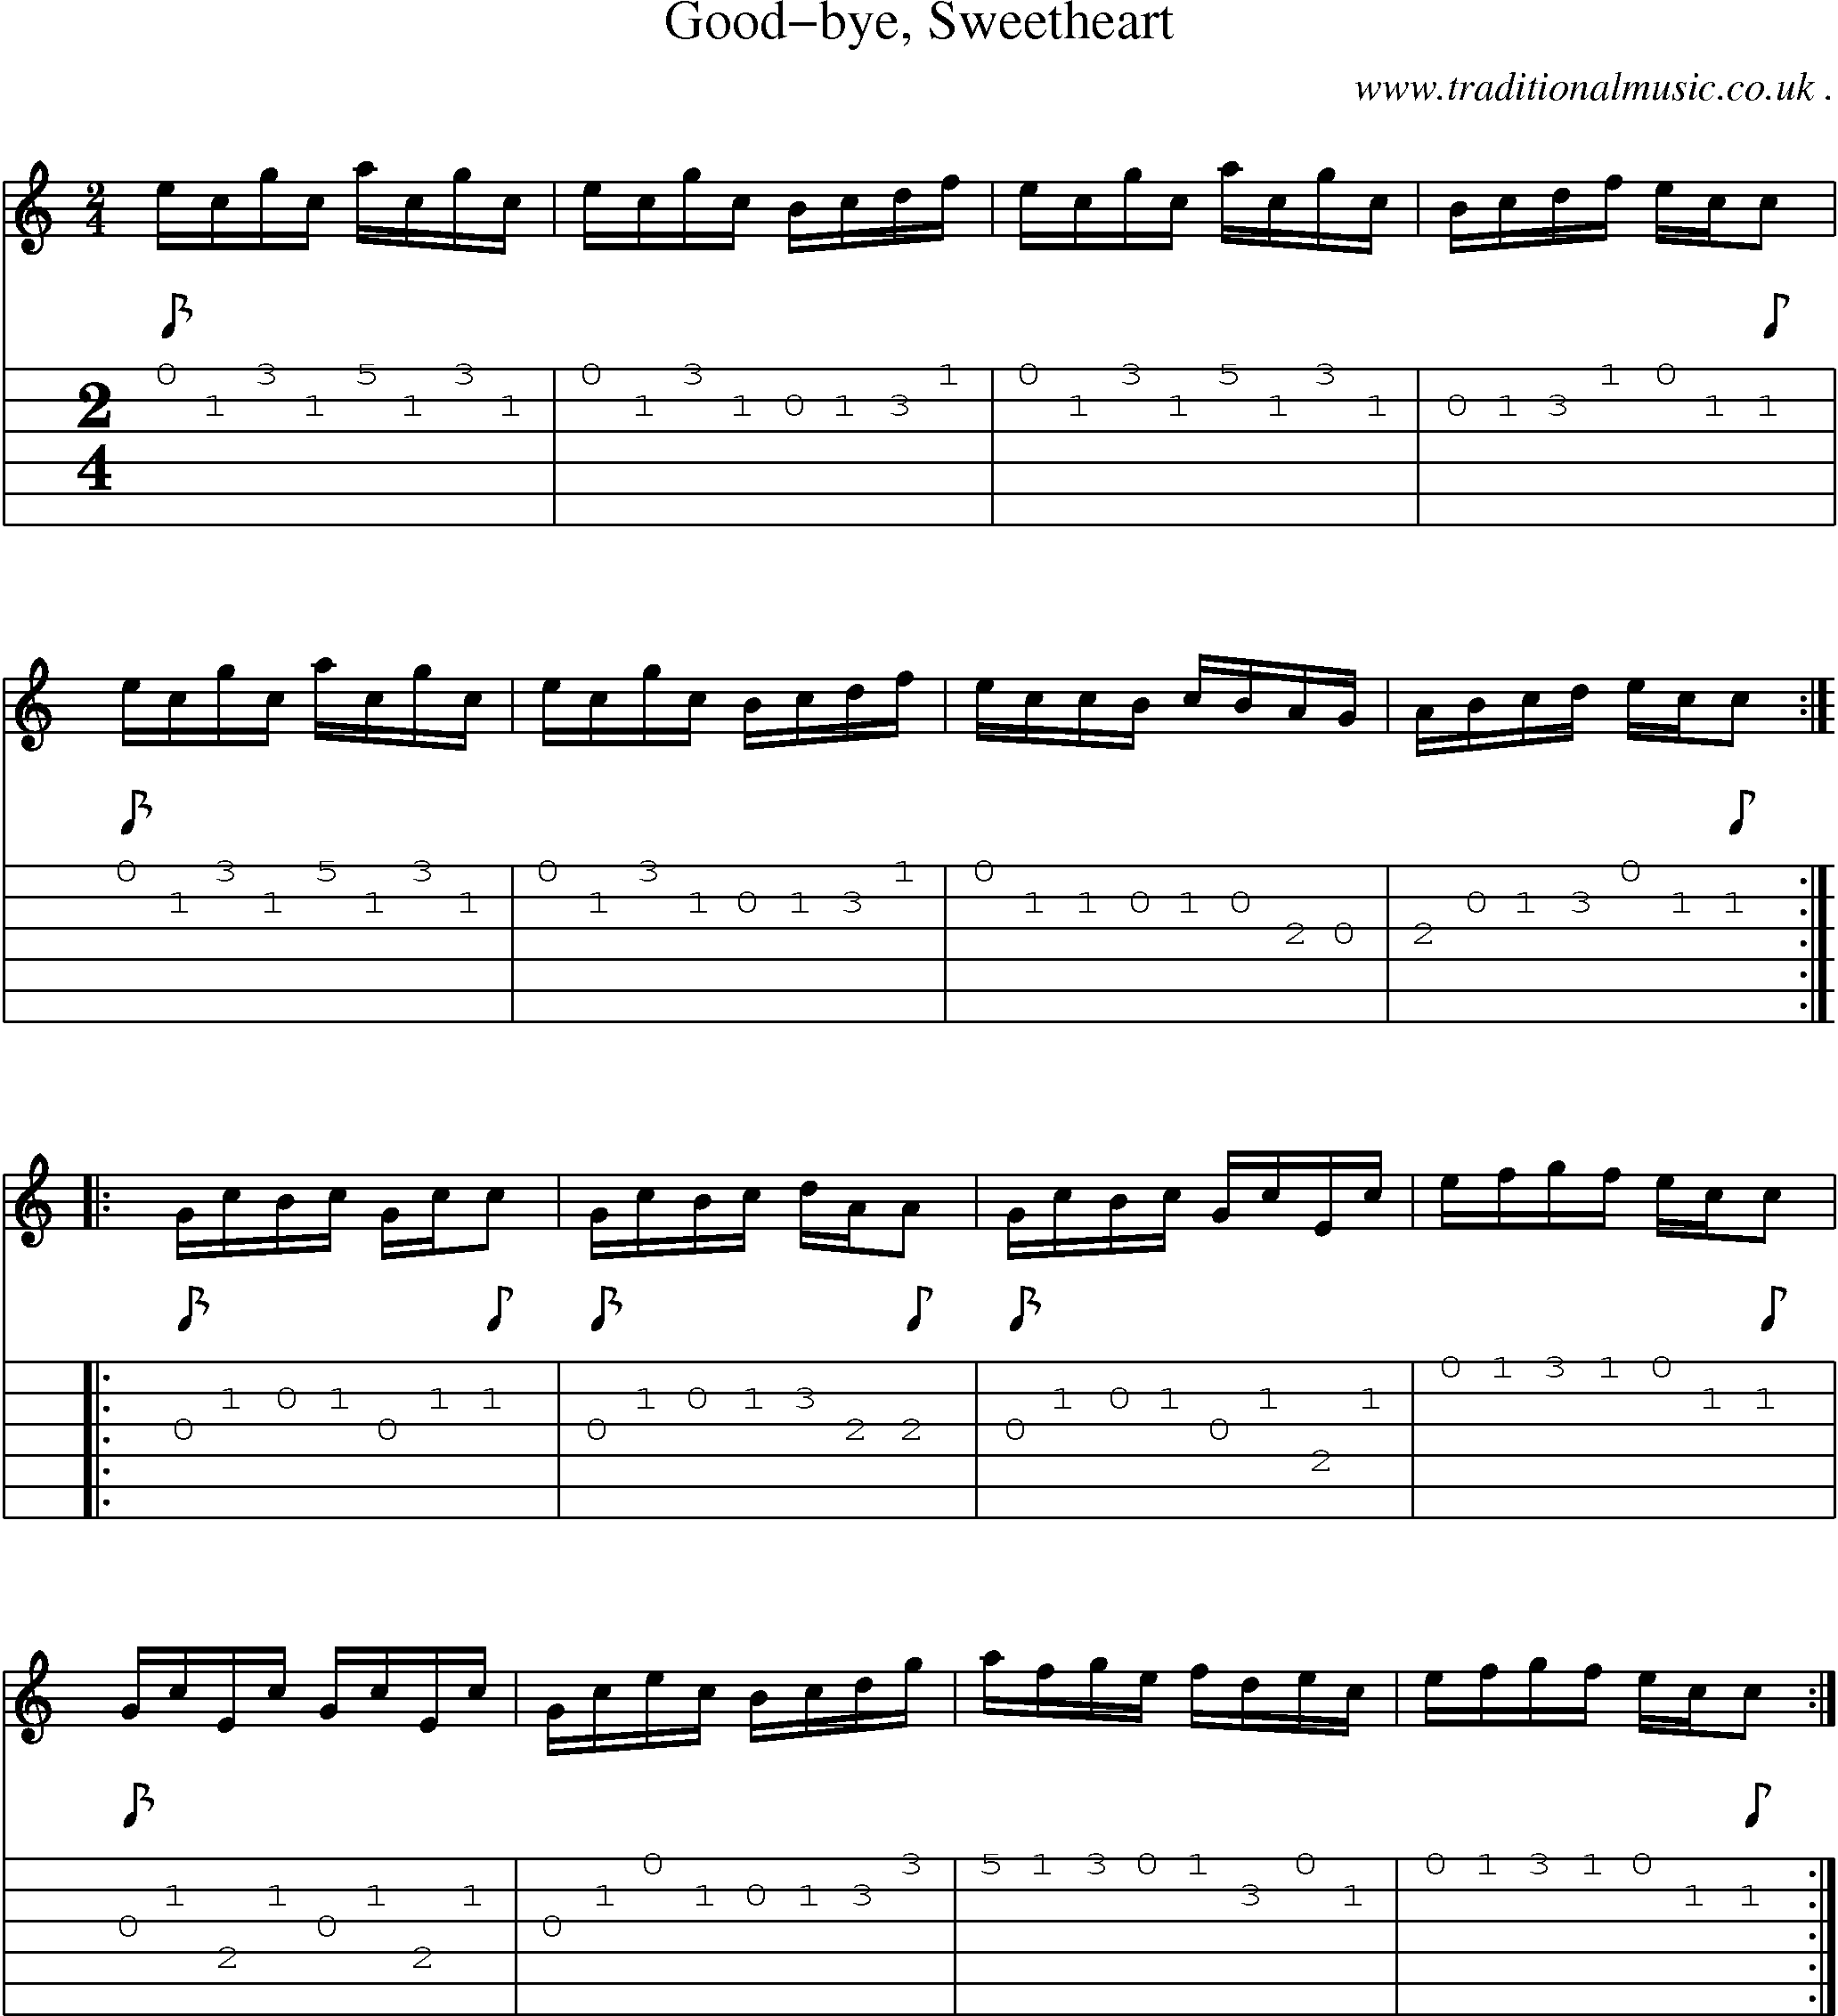 Sheet-Music and Guitar Tabs for Good-bye Sweetheart